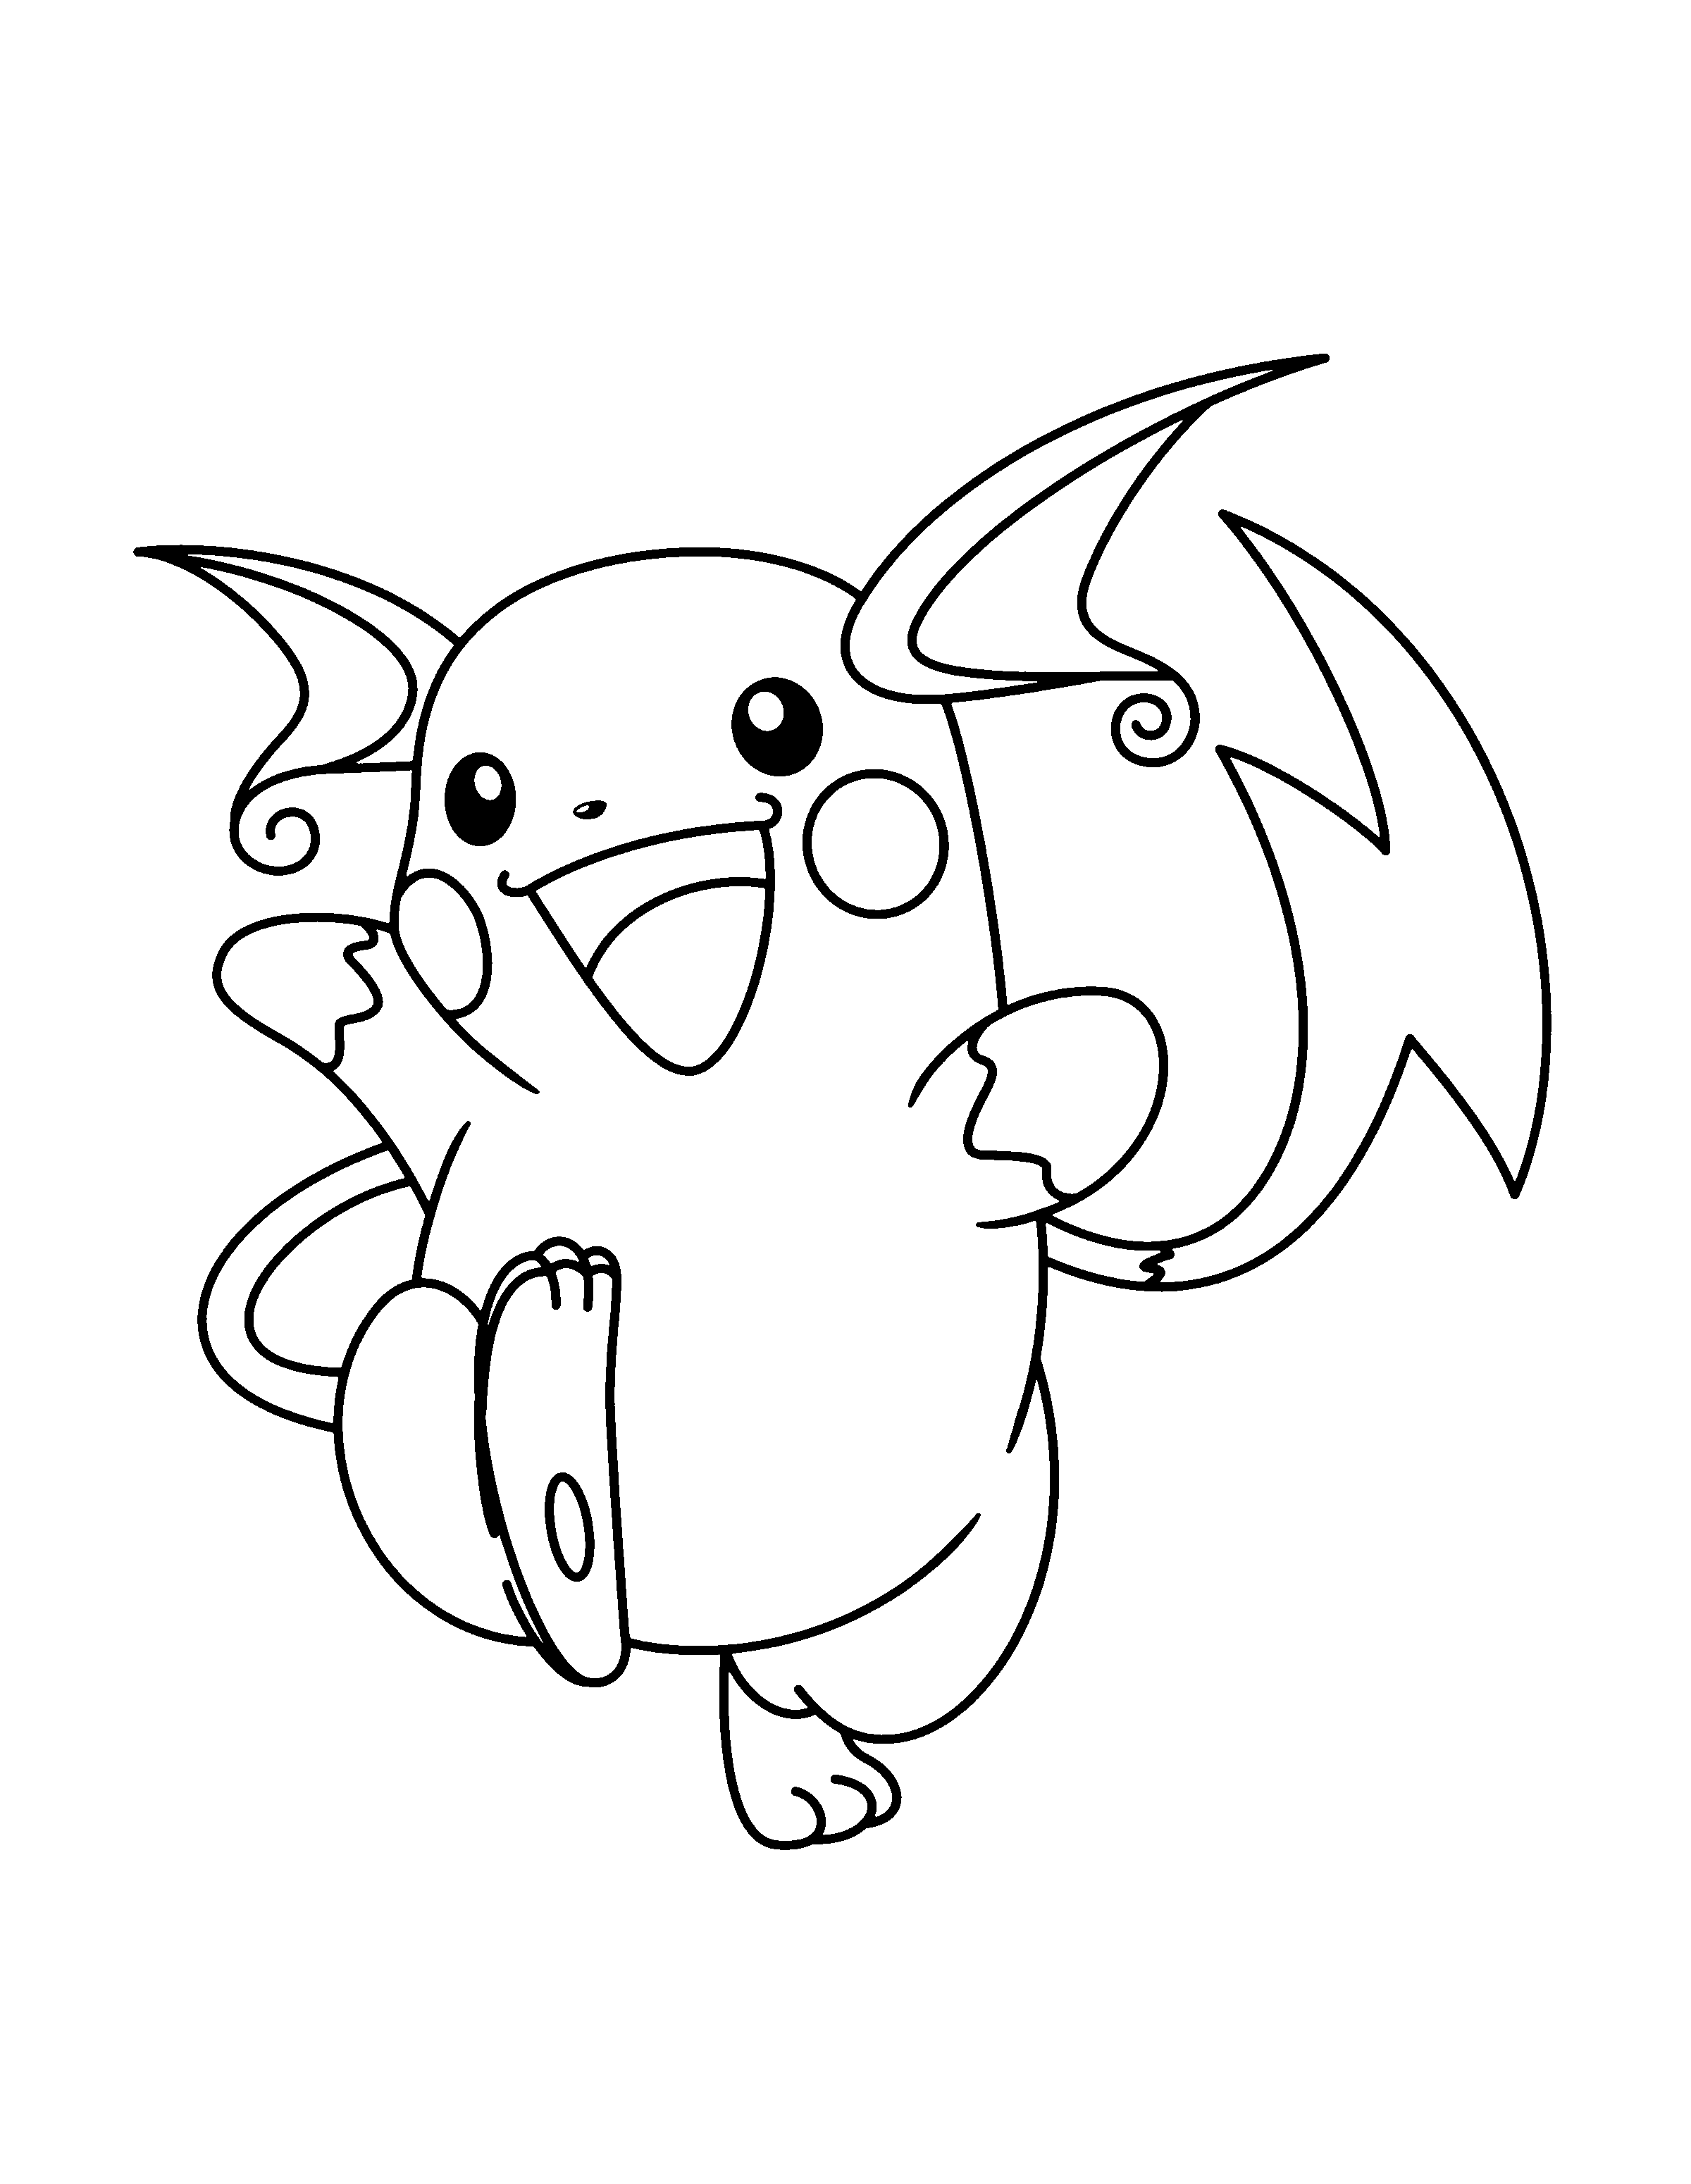 animated-coloring-pages-pokemon-image-1038